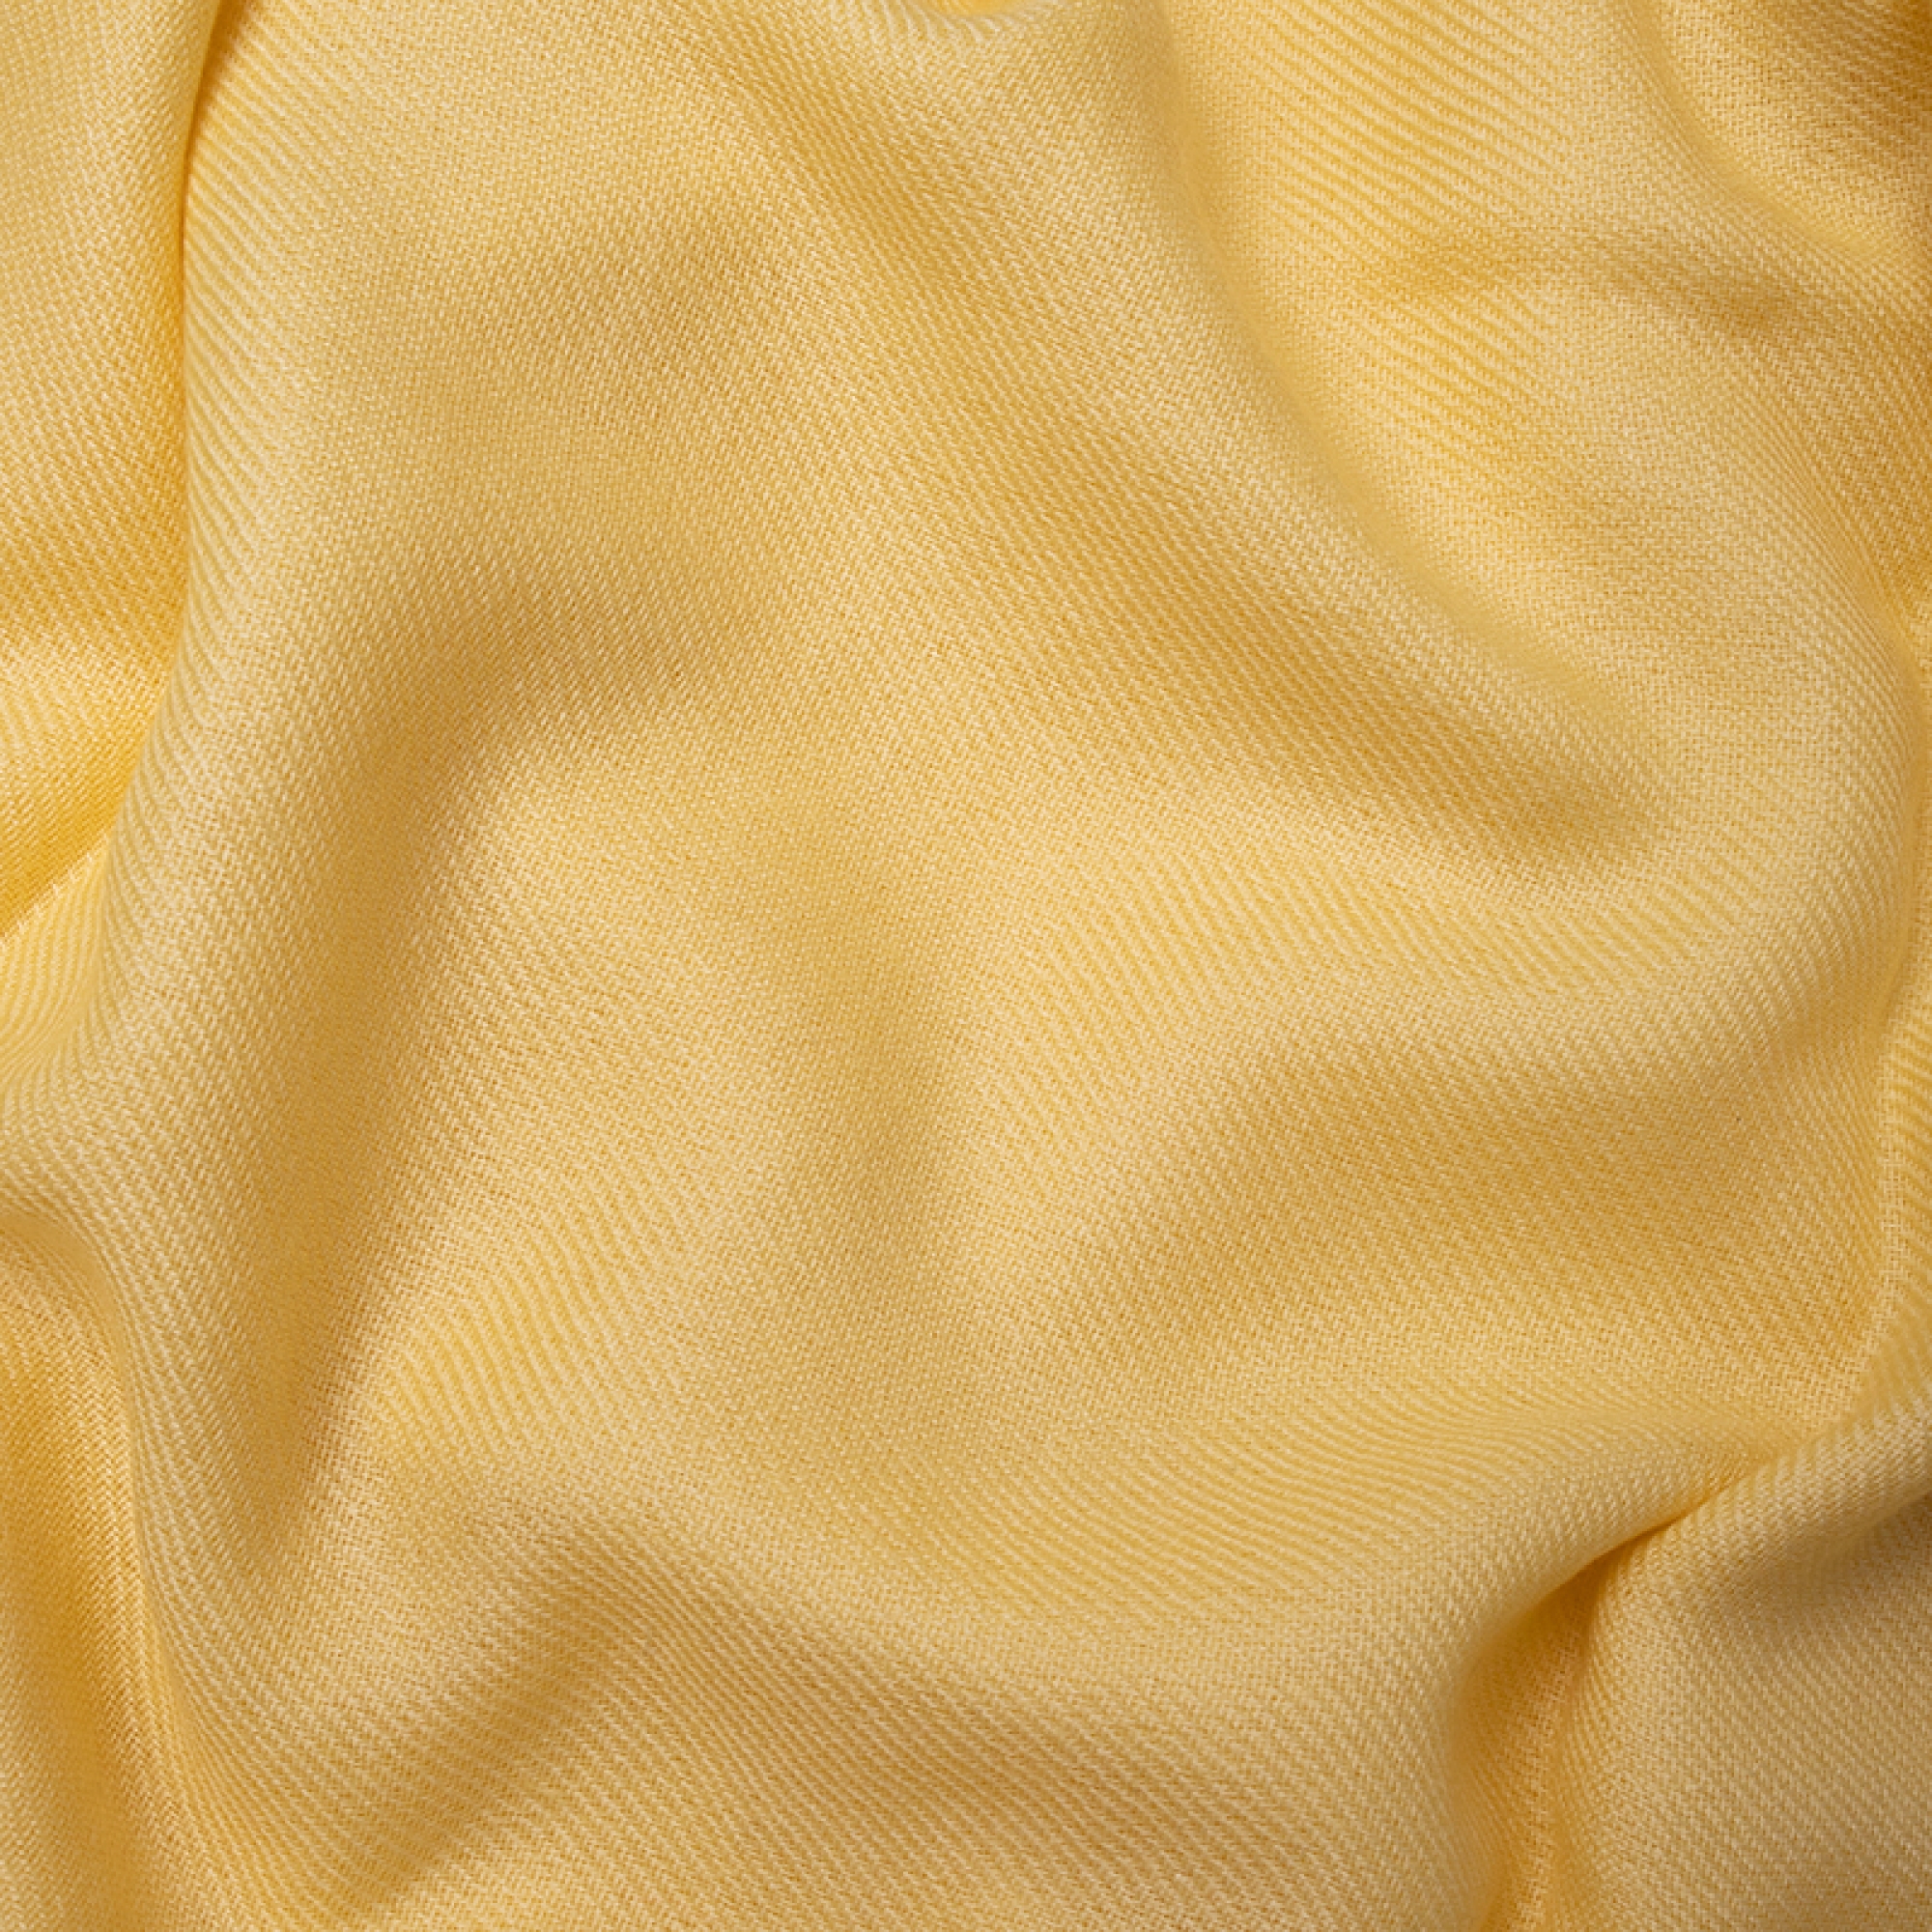 Cashmere accessories blanket toodoo plain s 140 x 200 mellow yellow 140 x 200 cm